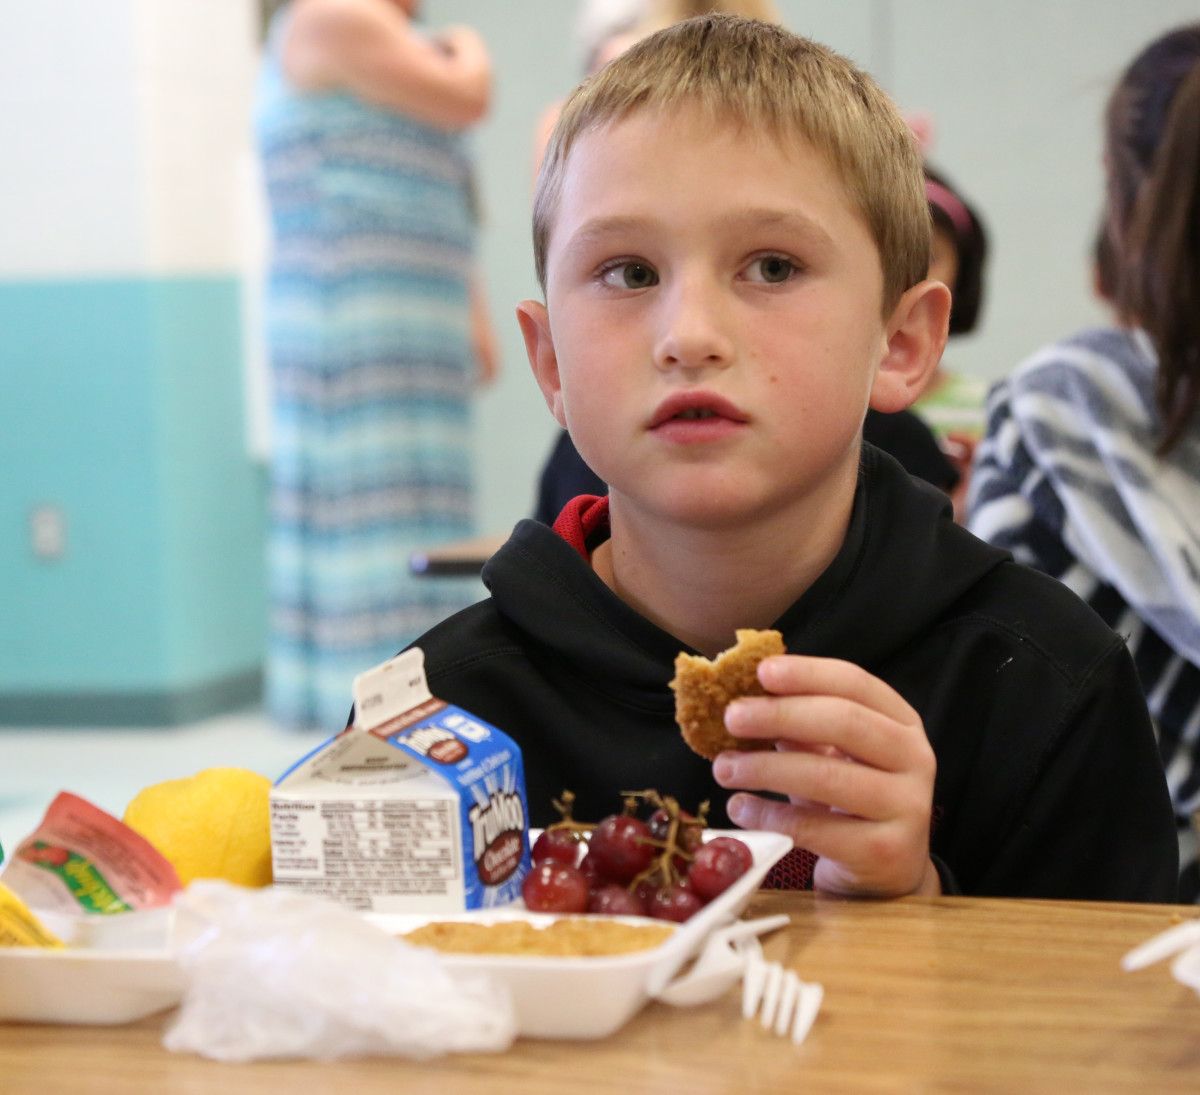 Free lunch program expands in Idaho The SpokesmanReview